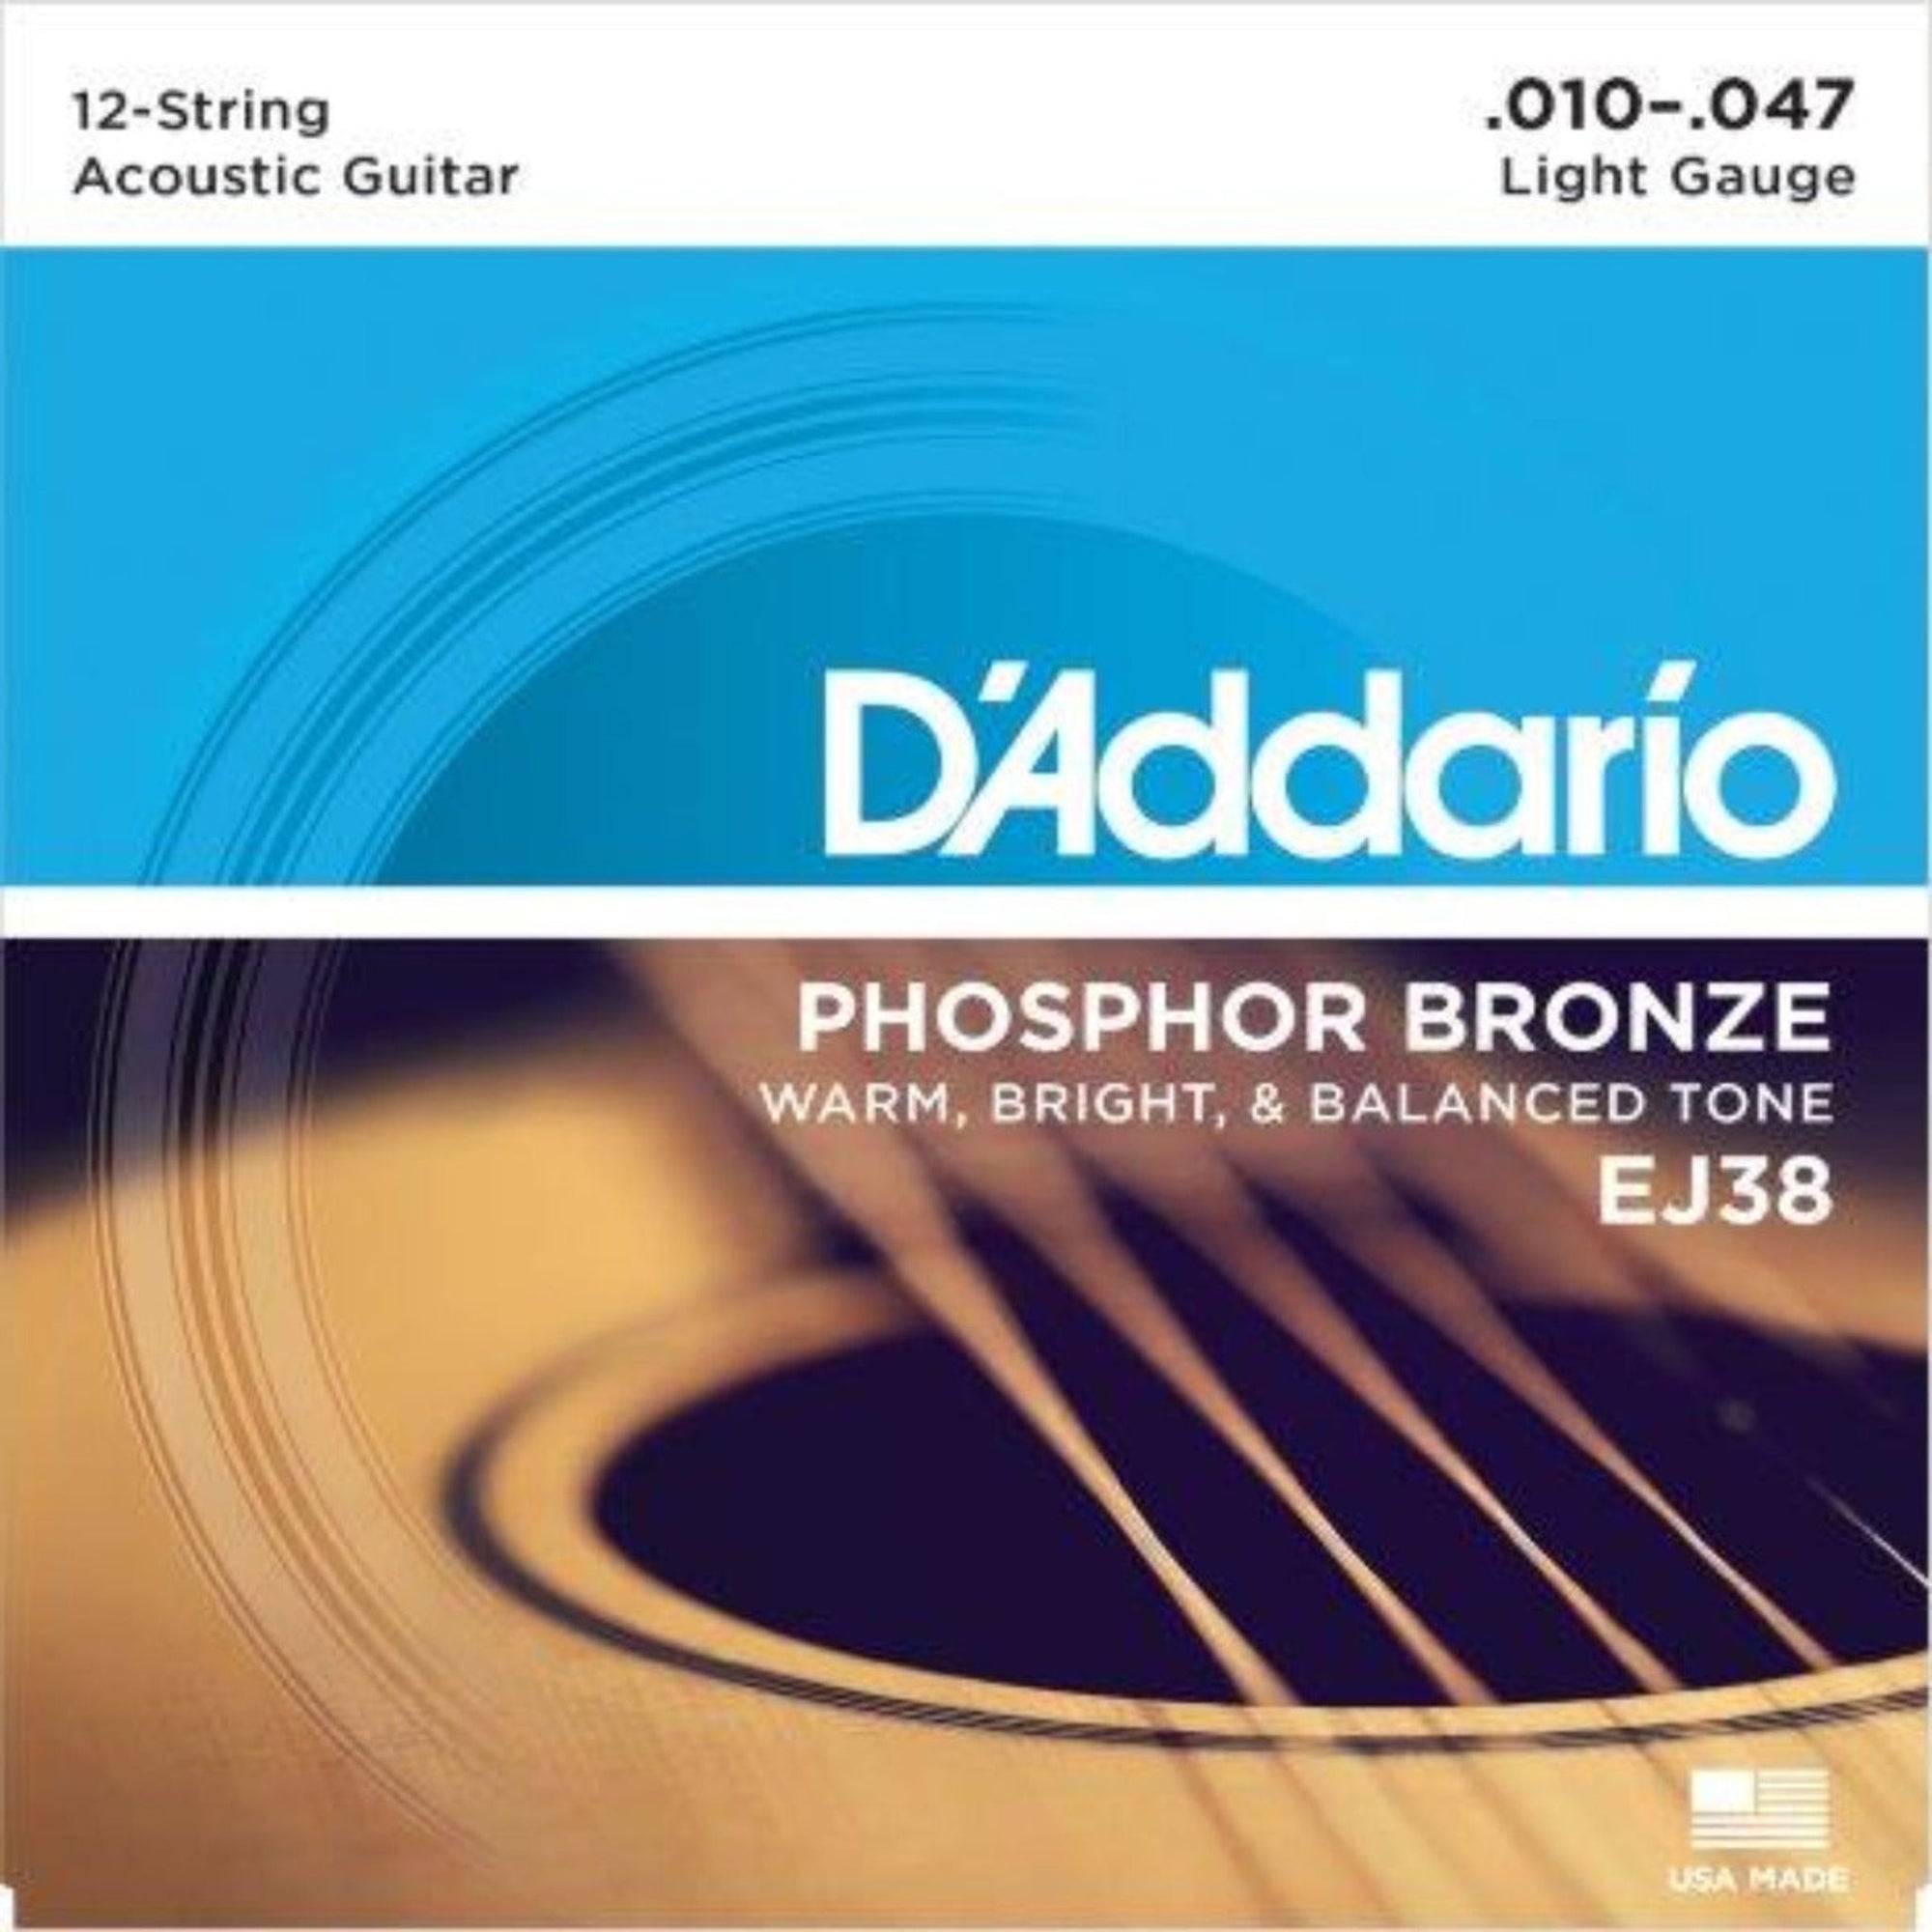 EJ38, D'Addario's most popular 12-string set, offers the ideal balance of volume, projection and comfortable playability. Designed for all makes and models of 12-string acoustic guitars.